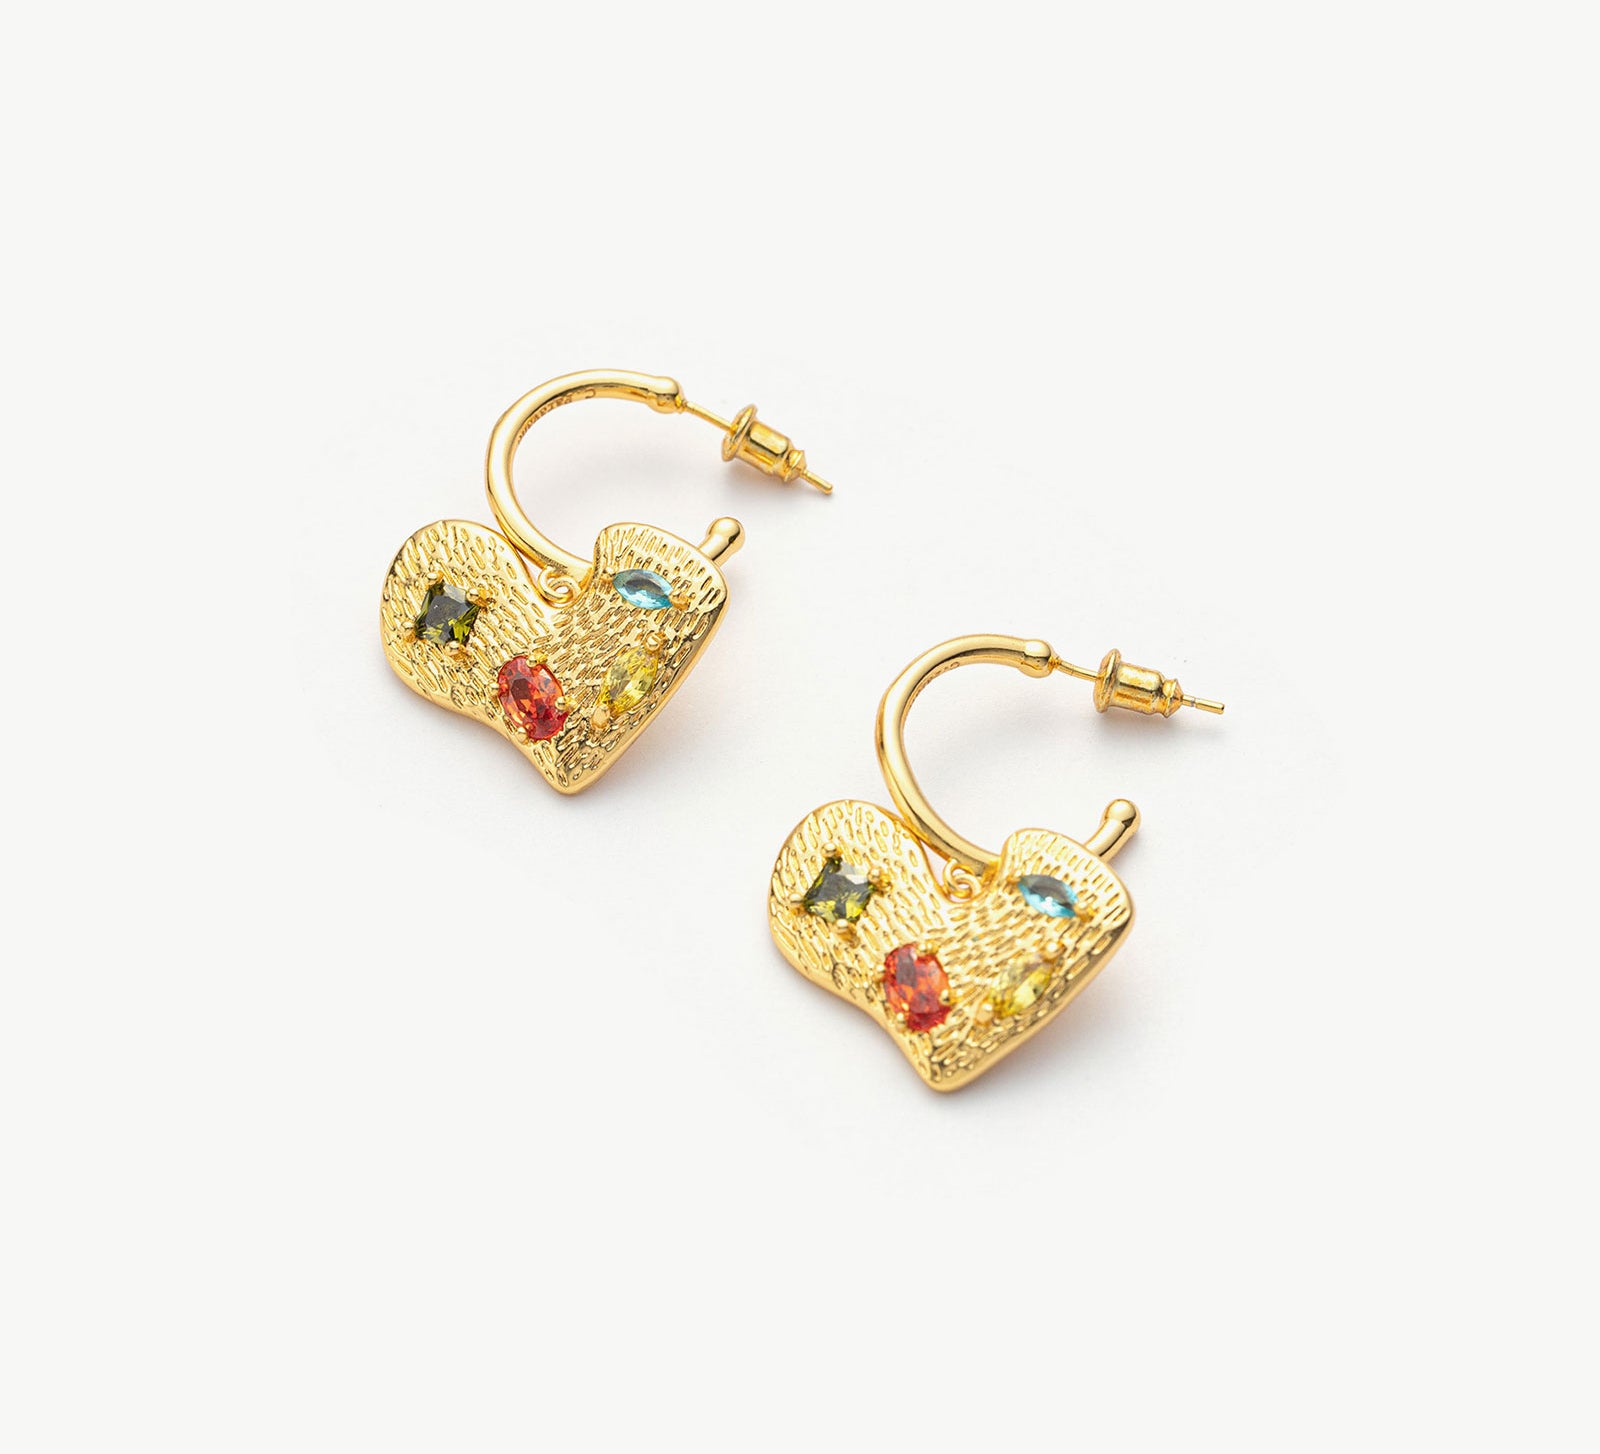 Hoop Earrings adorned with heart-shaped gemstone charms, a versatile and chic pair that effortlessly complements a range of outfits